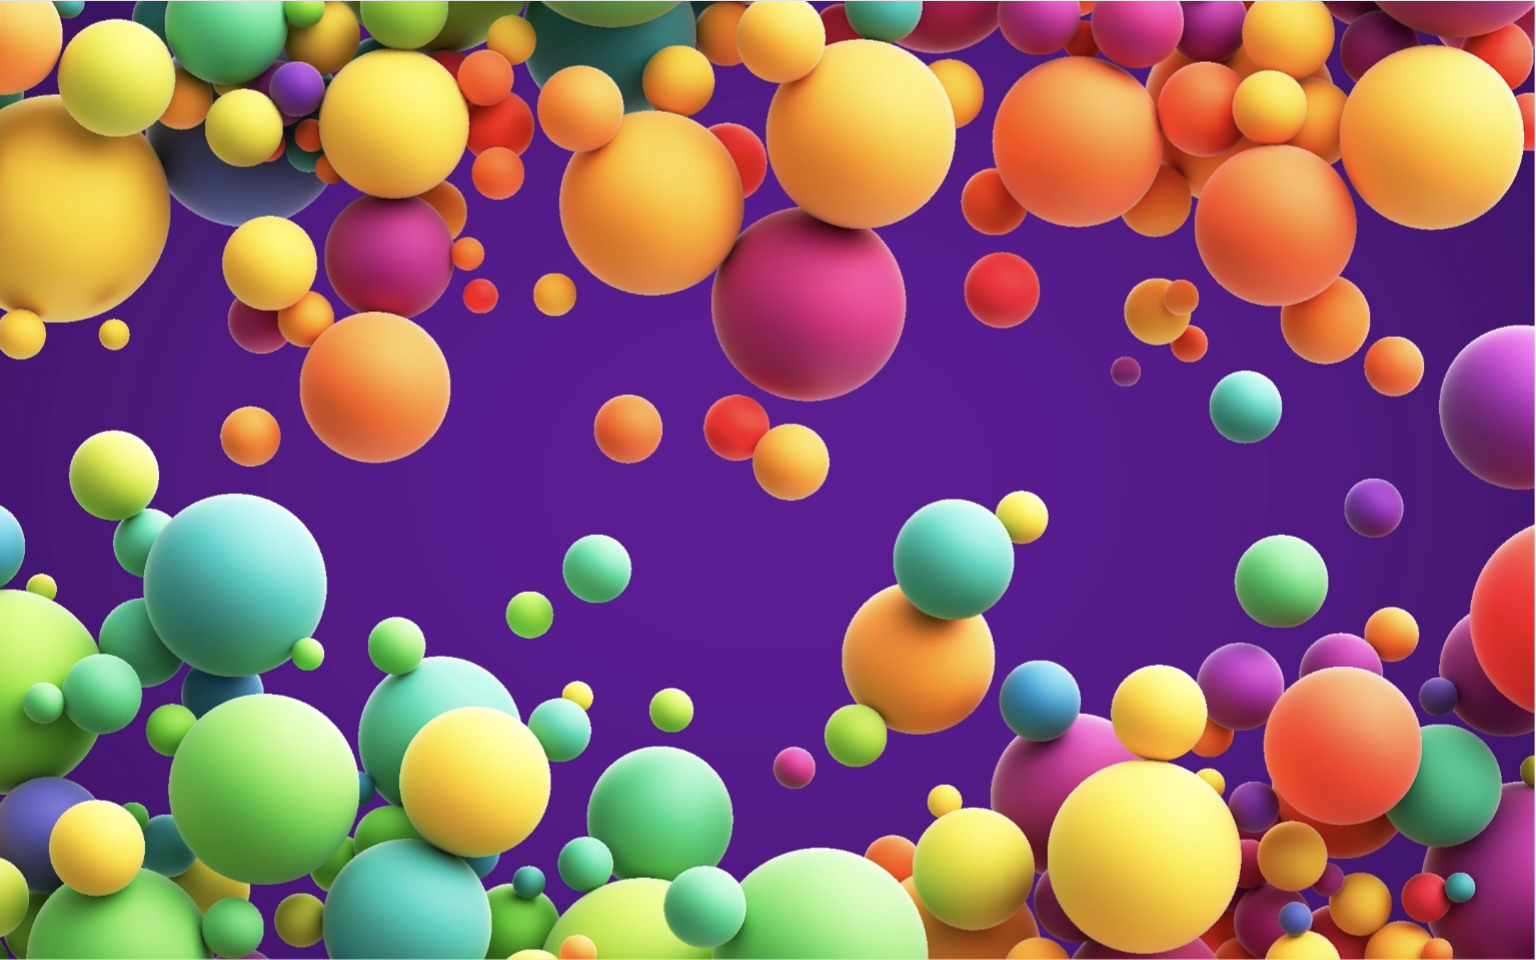 Balloons in purple space 2